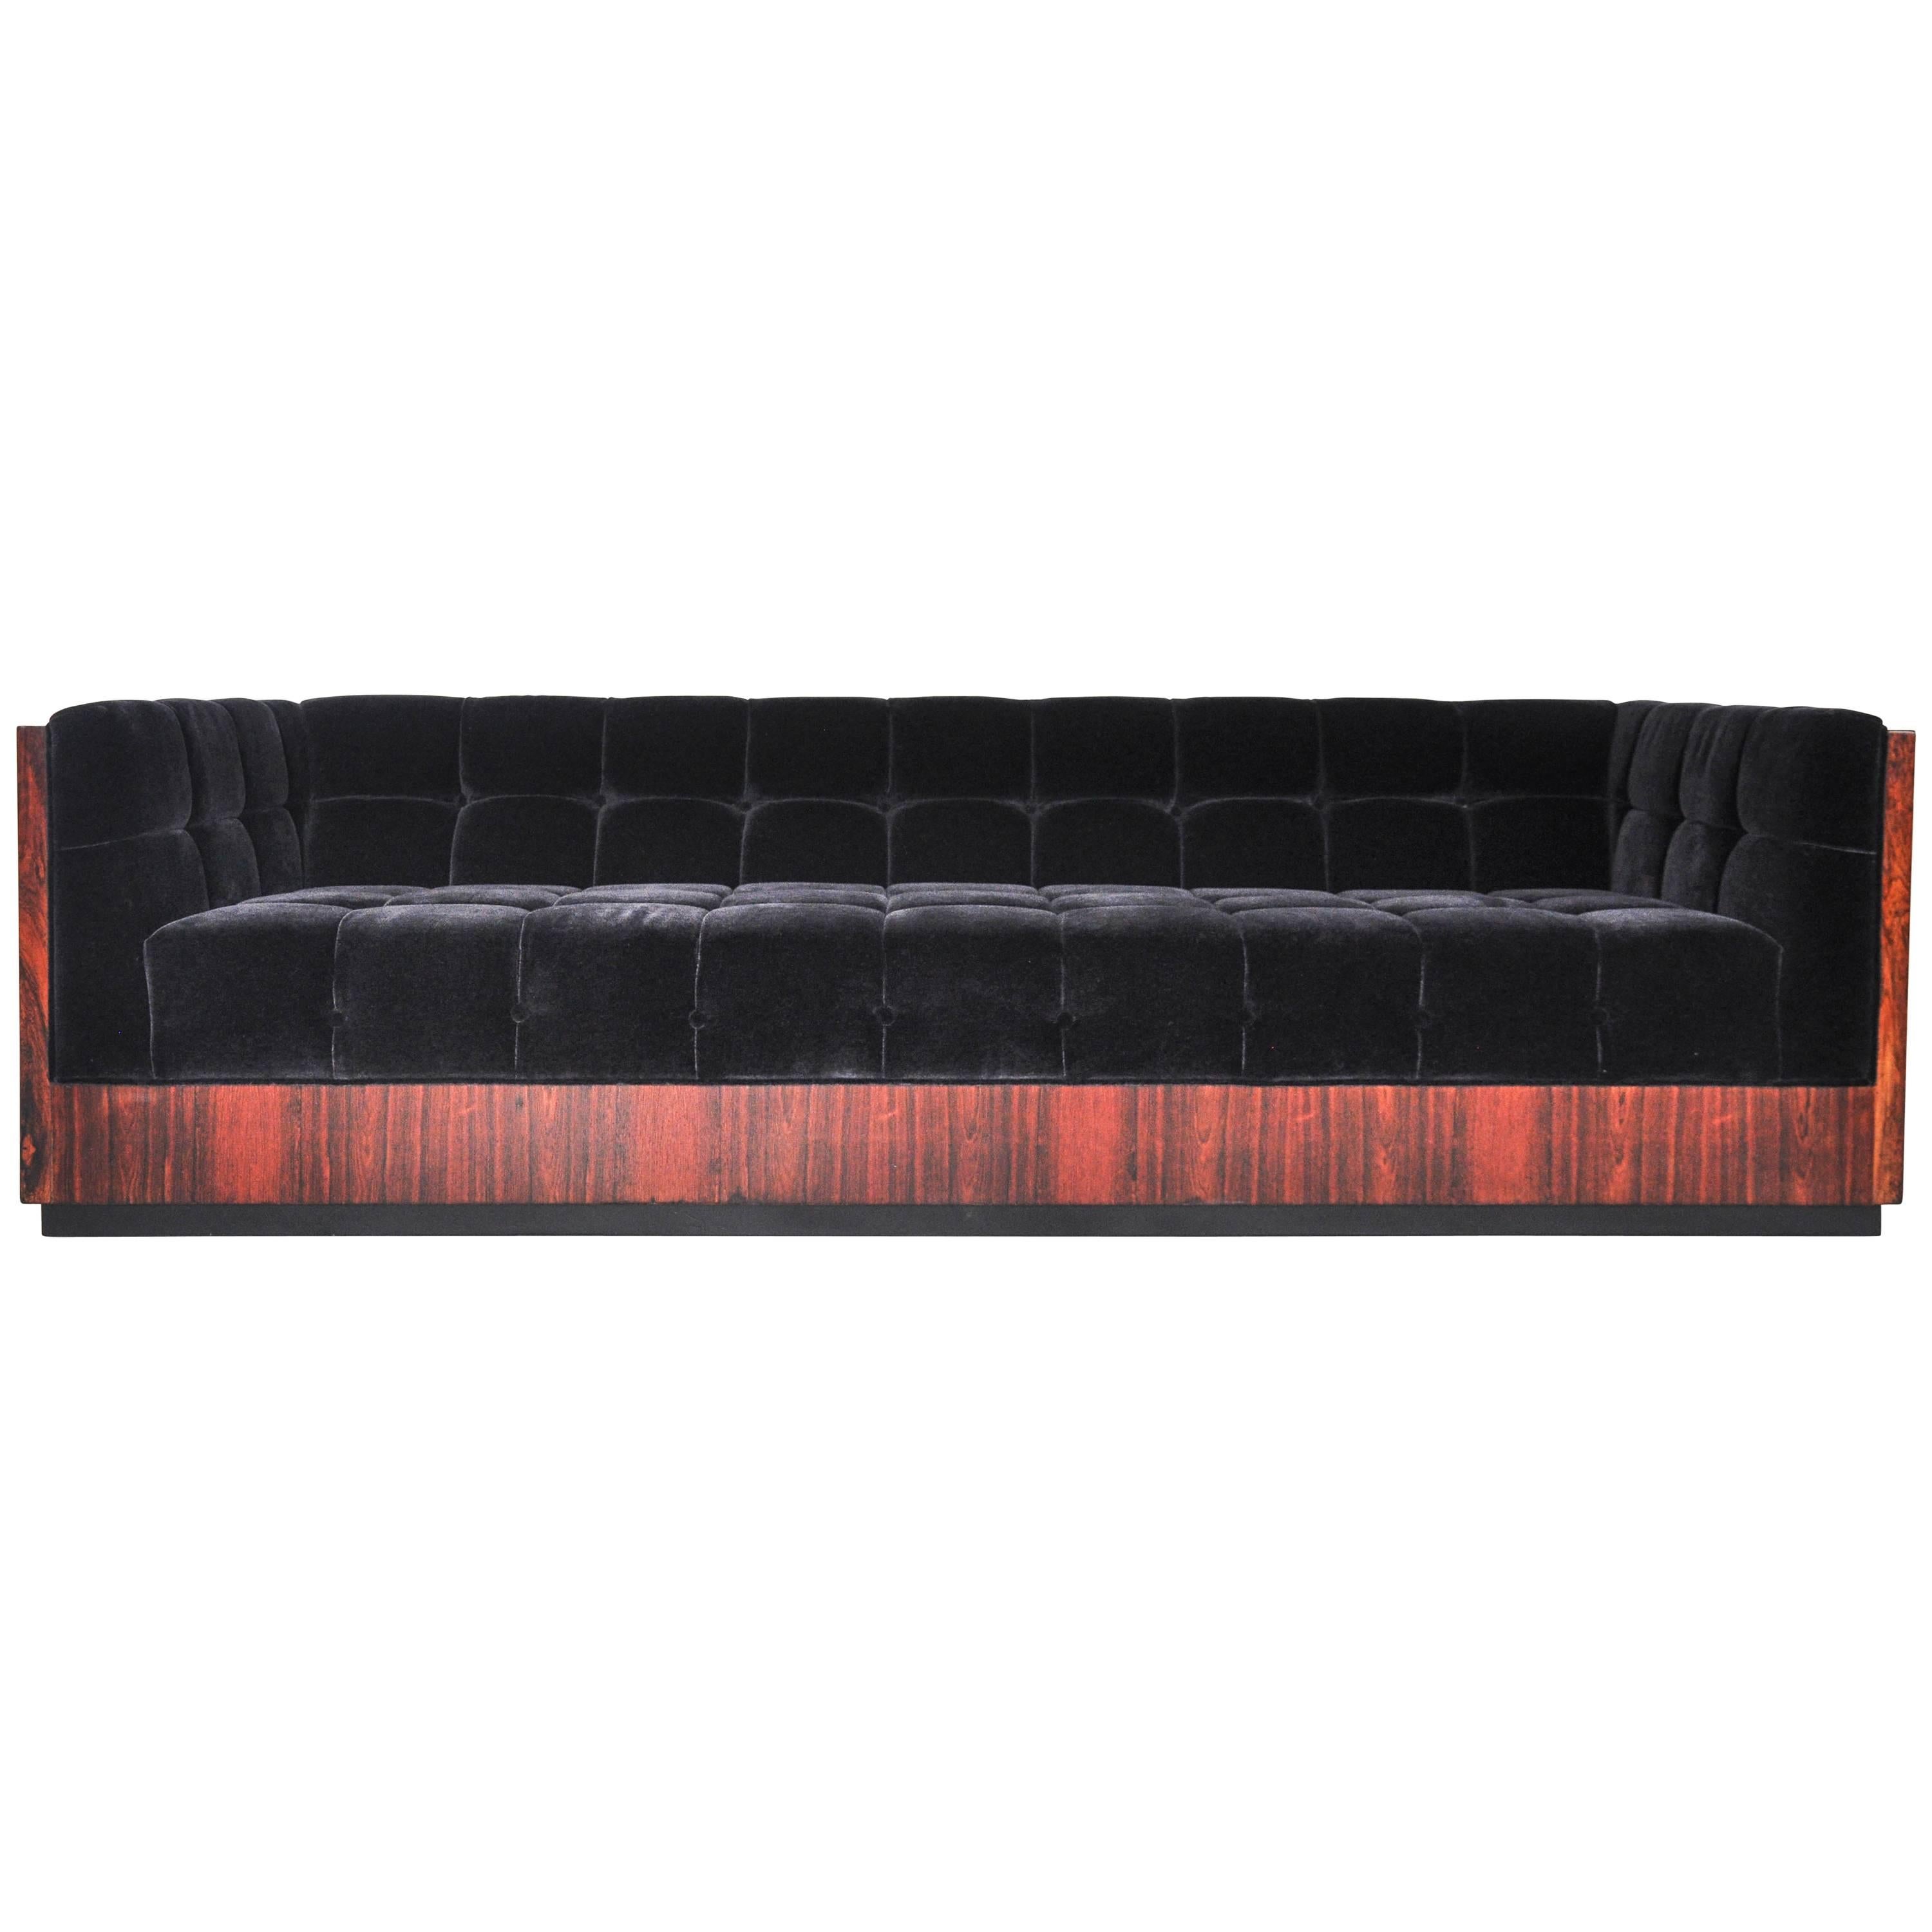 Rosewood case sofa upholstered in tufted black mohair. Designed by Milo Baughman. Figural rosewood grain. Fully restored and reupholstered.